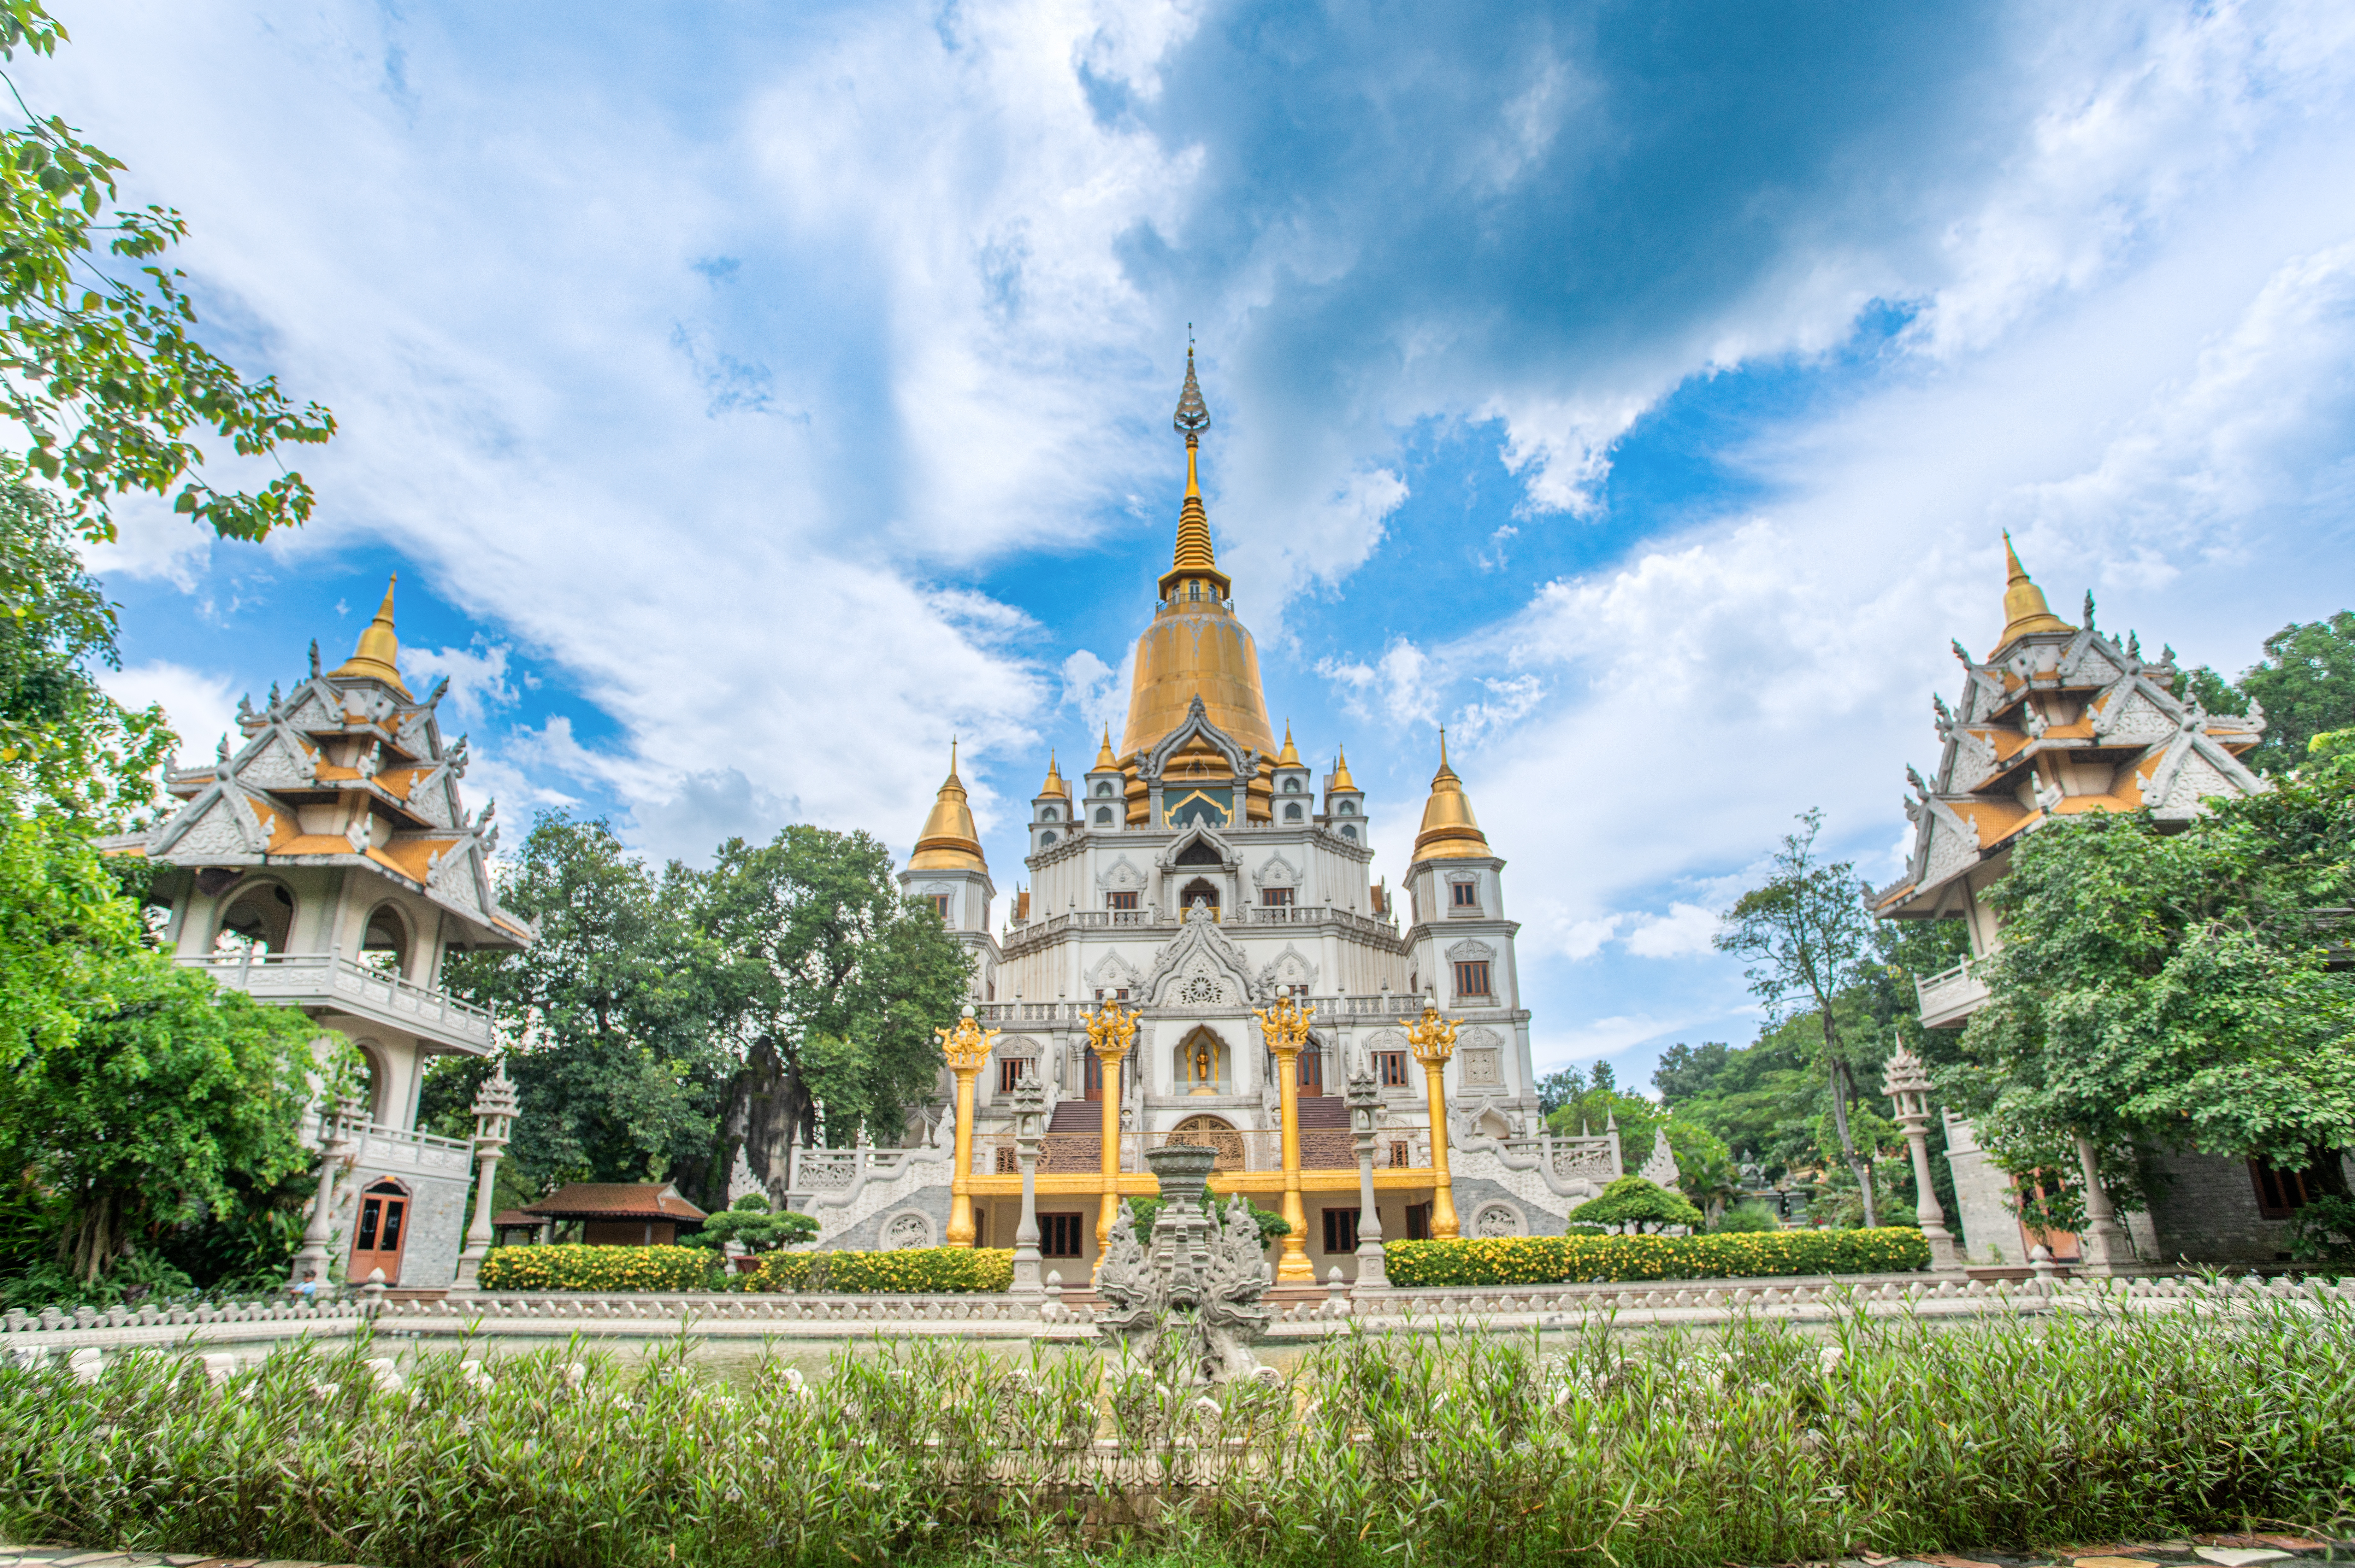 Photo of The Day: A beautiful pagoda in Ho Chi Minh City